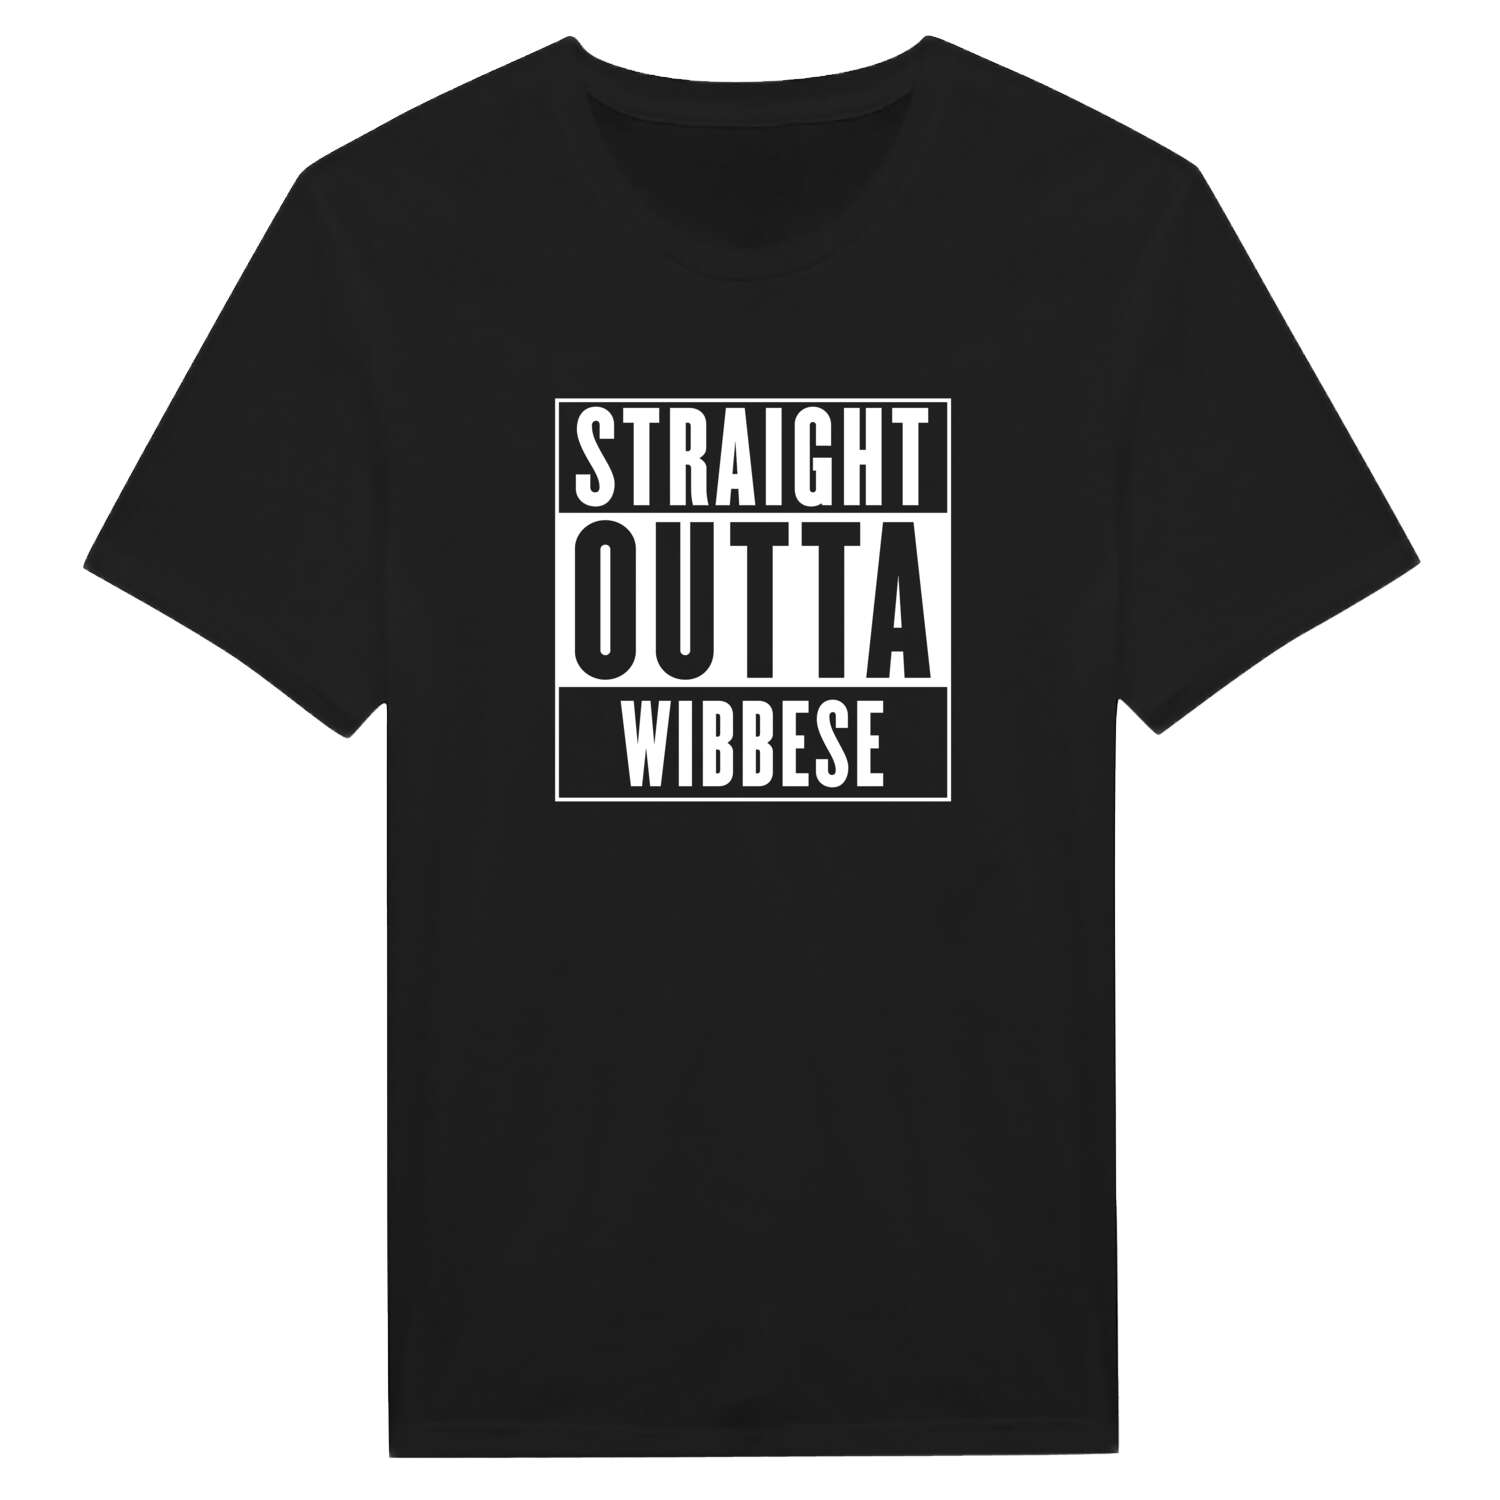 Wibbese T-Shirt »Straight Outta«